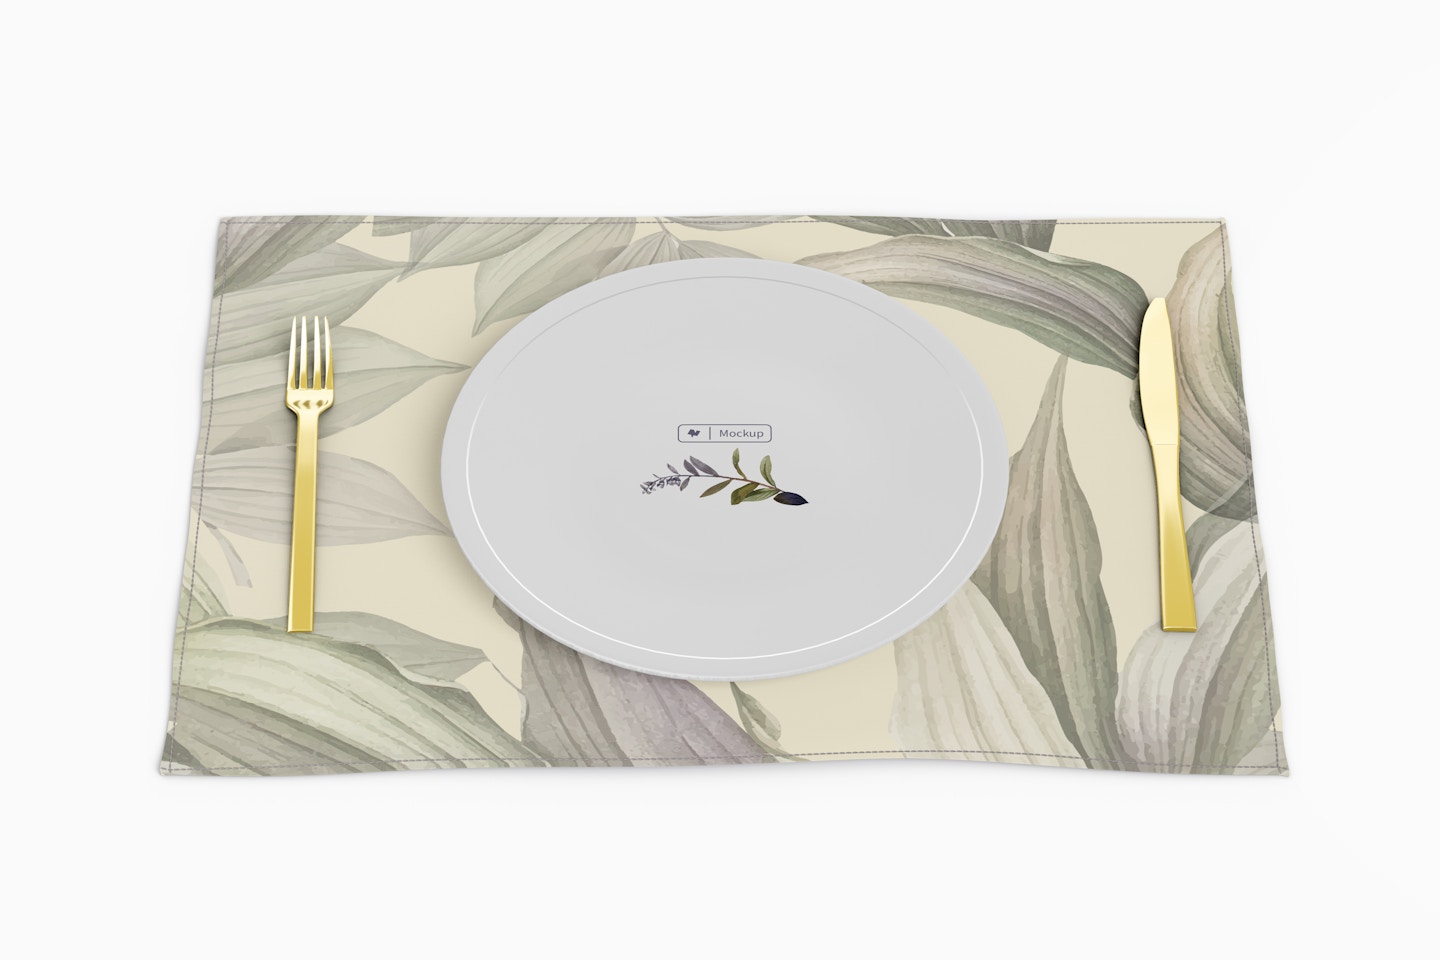 Fabric Placemat with Plates Mockup